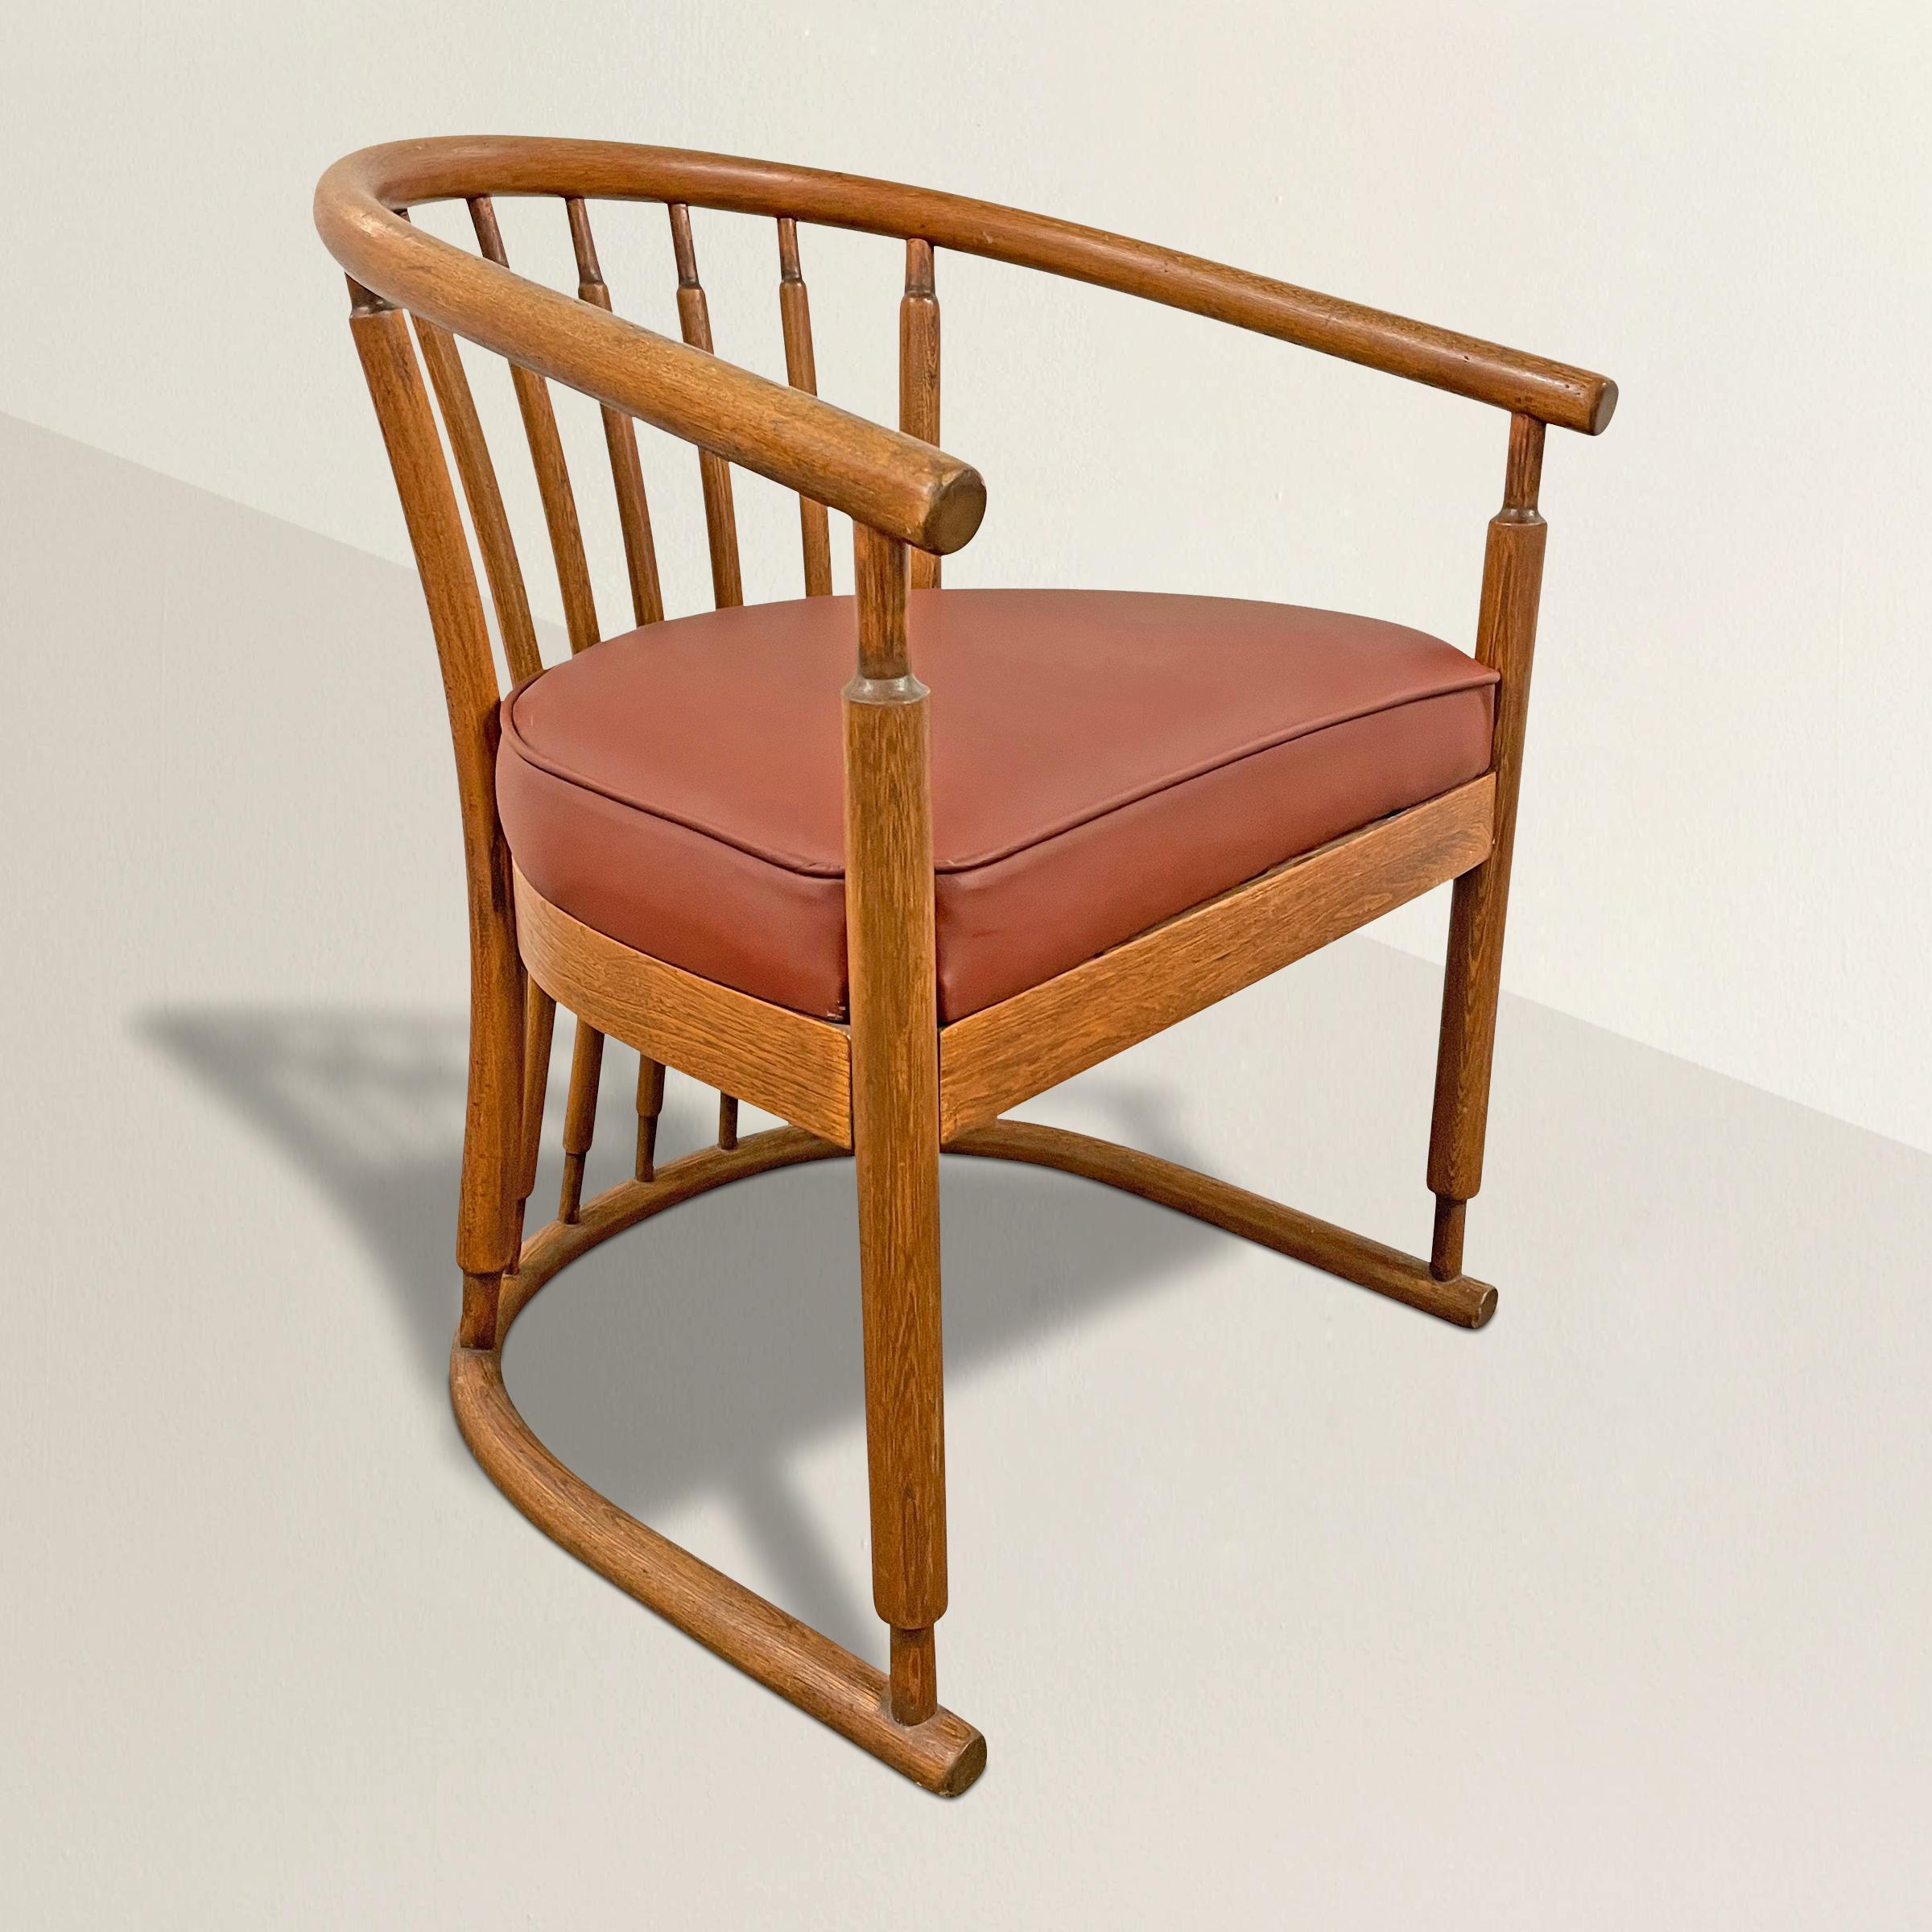 A chic modern bentwood barrellback arm chair constructed with a single bentwood horseshoe crestrail, a single bentwood horseshoe foot, and attached with several bentwood back spindles. The seat is newly upholstered in a soft red leather.